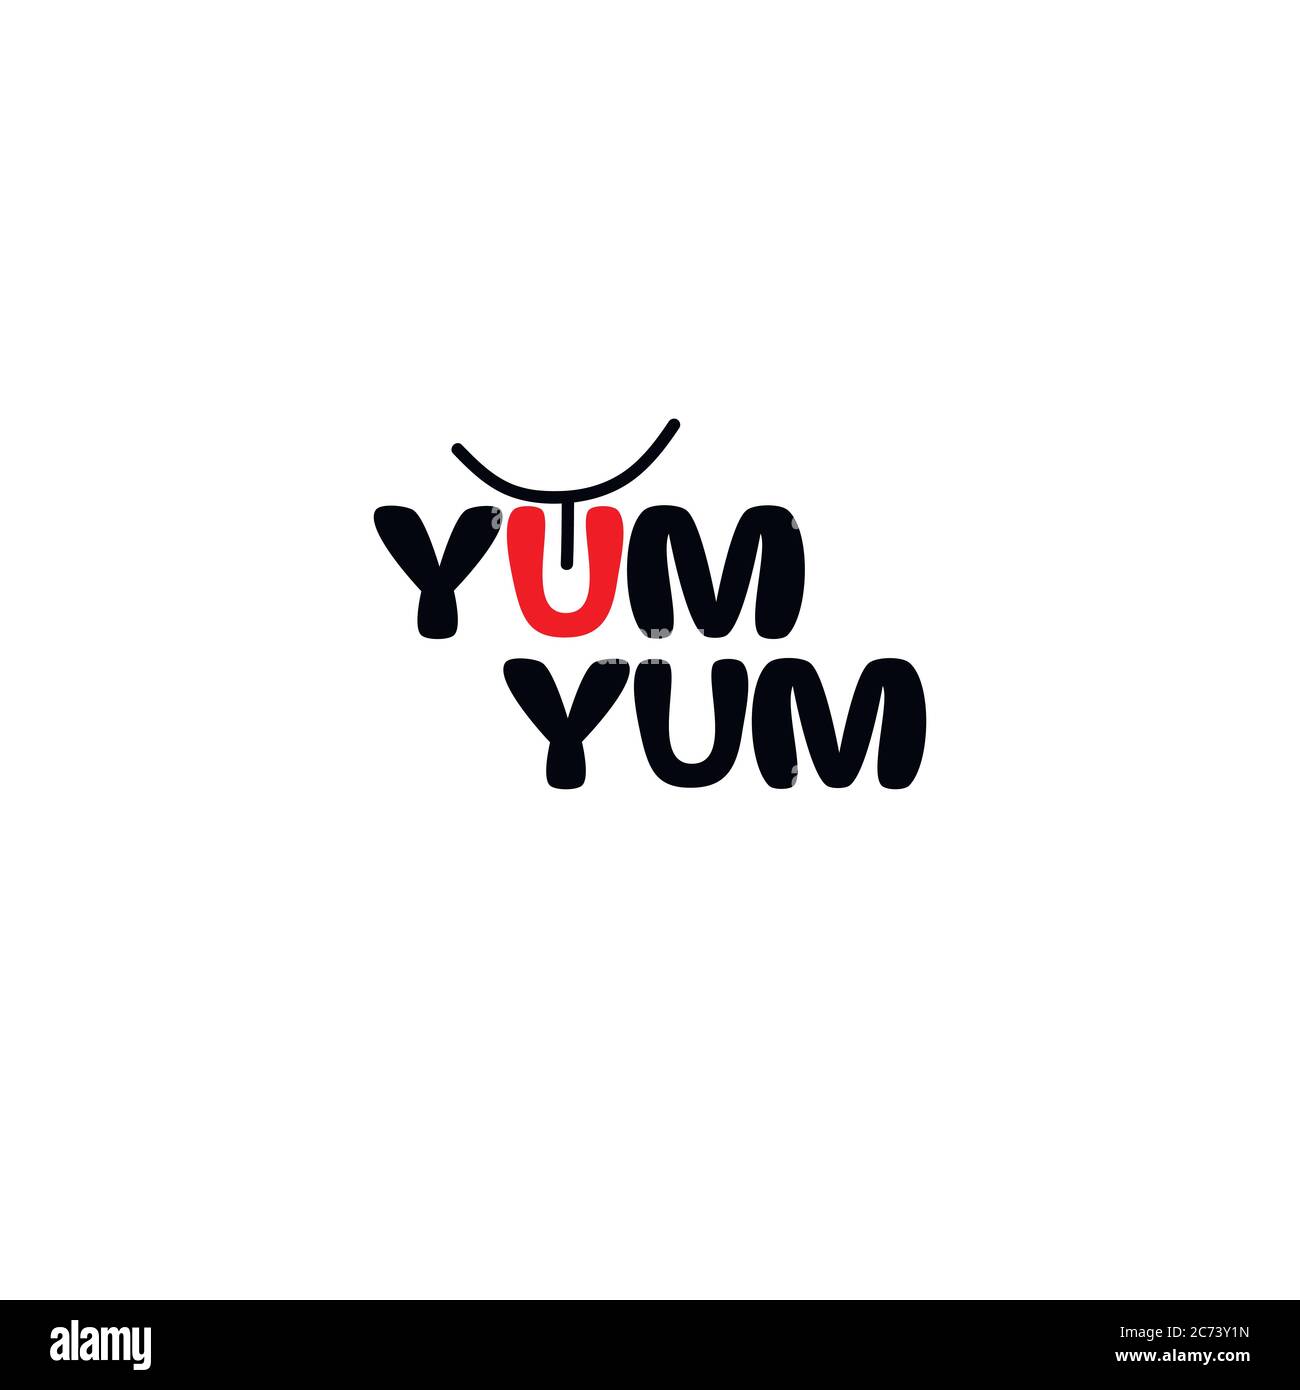 Yum Yum logo text. Cartoon hand drawn calligraphy style.Design doodle for print. Vector illustration. Stock Vector